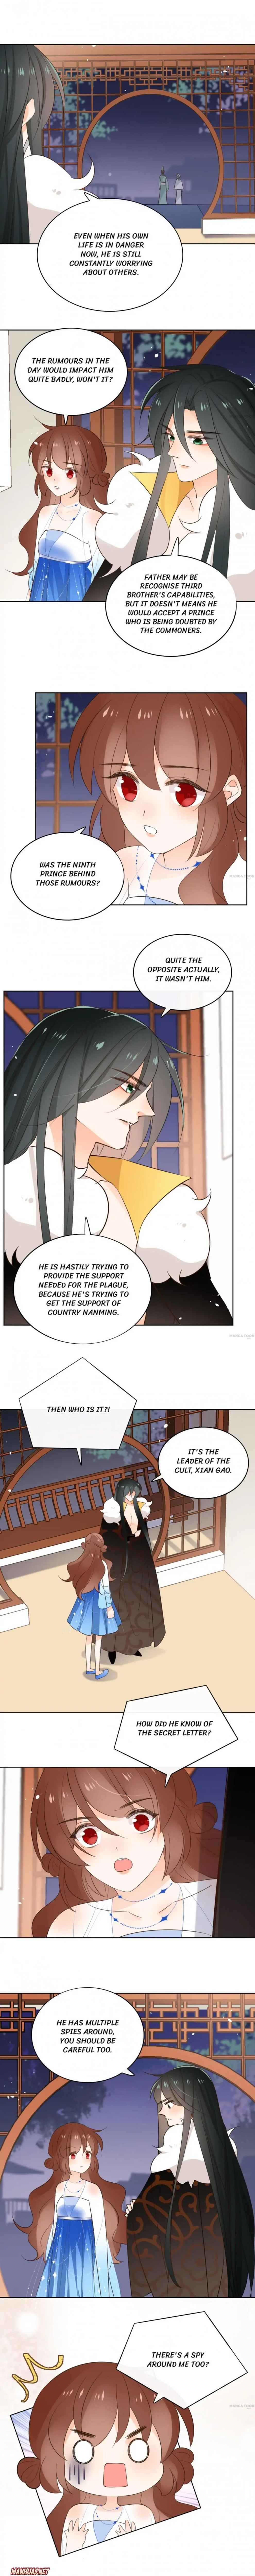 Take Me In, My Lord - Page 2